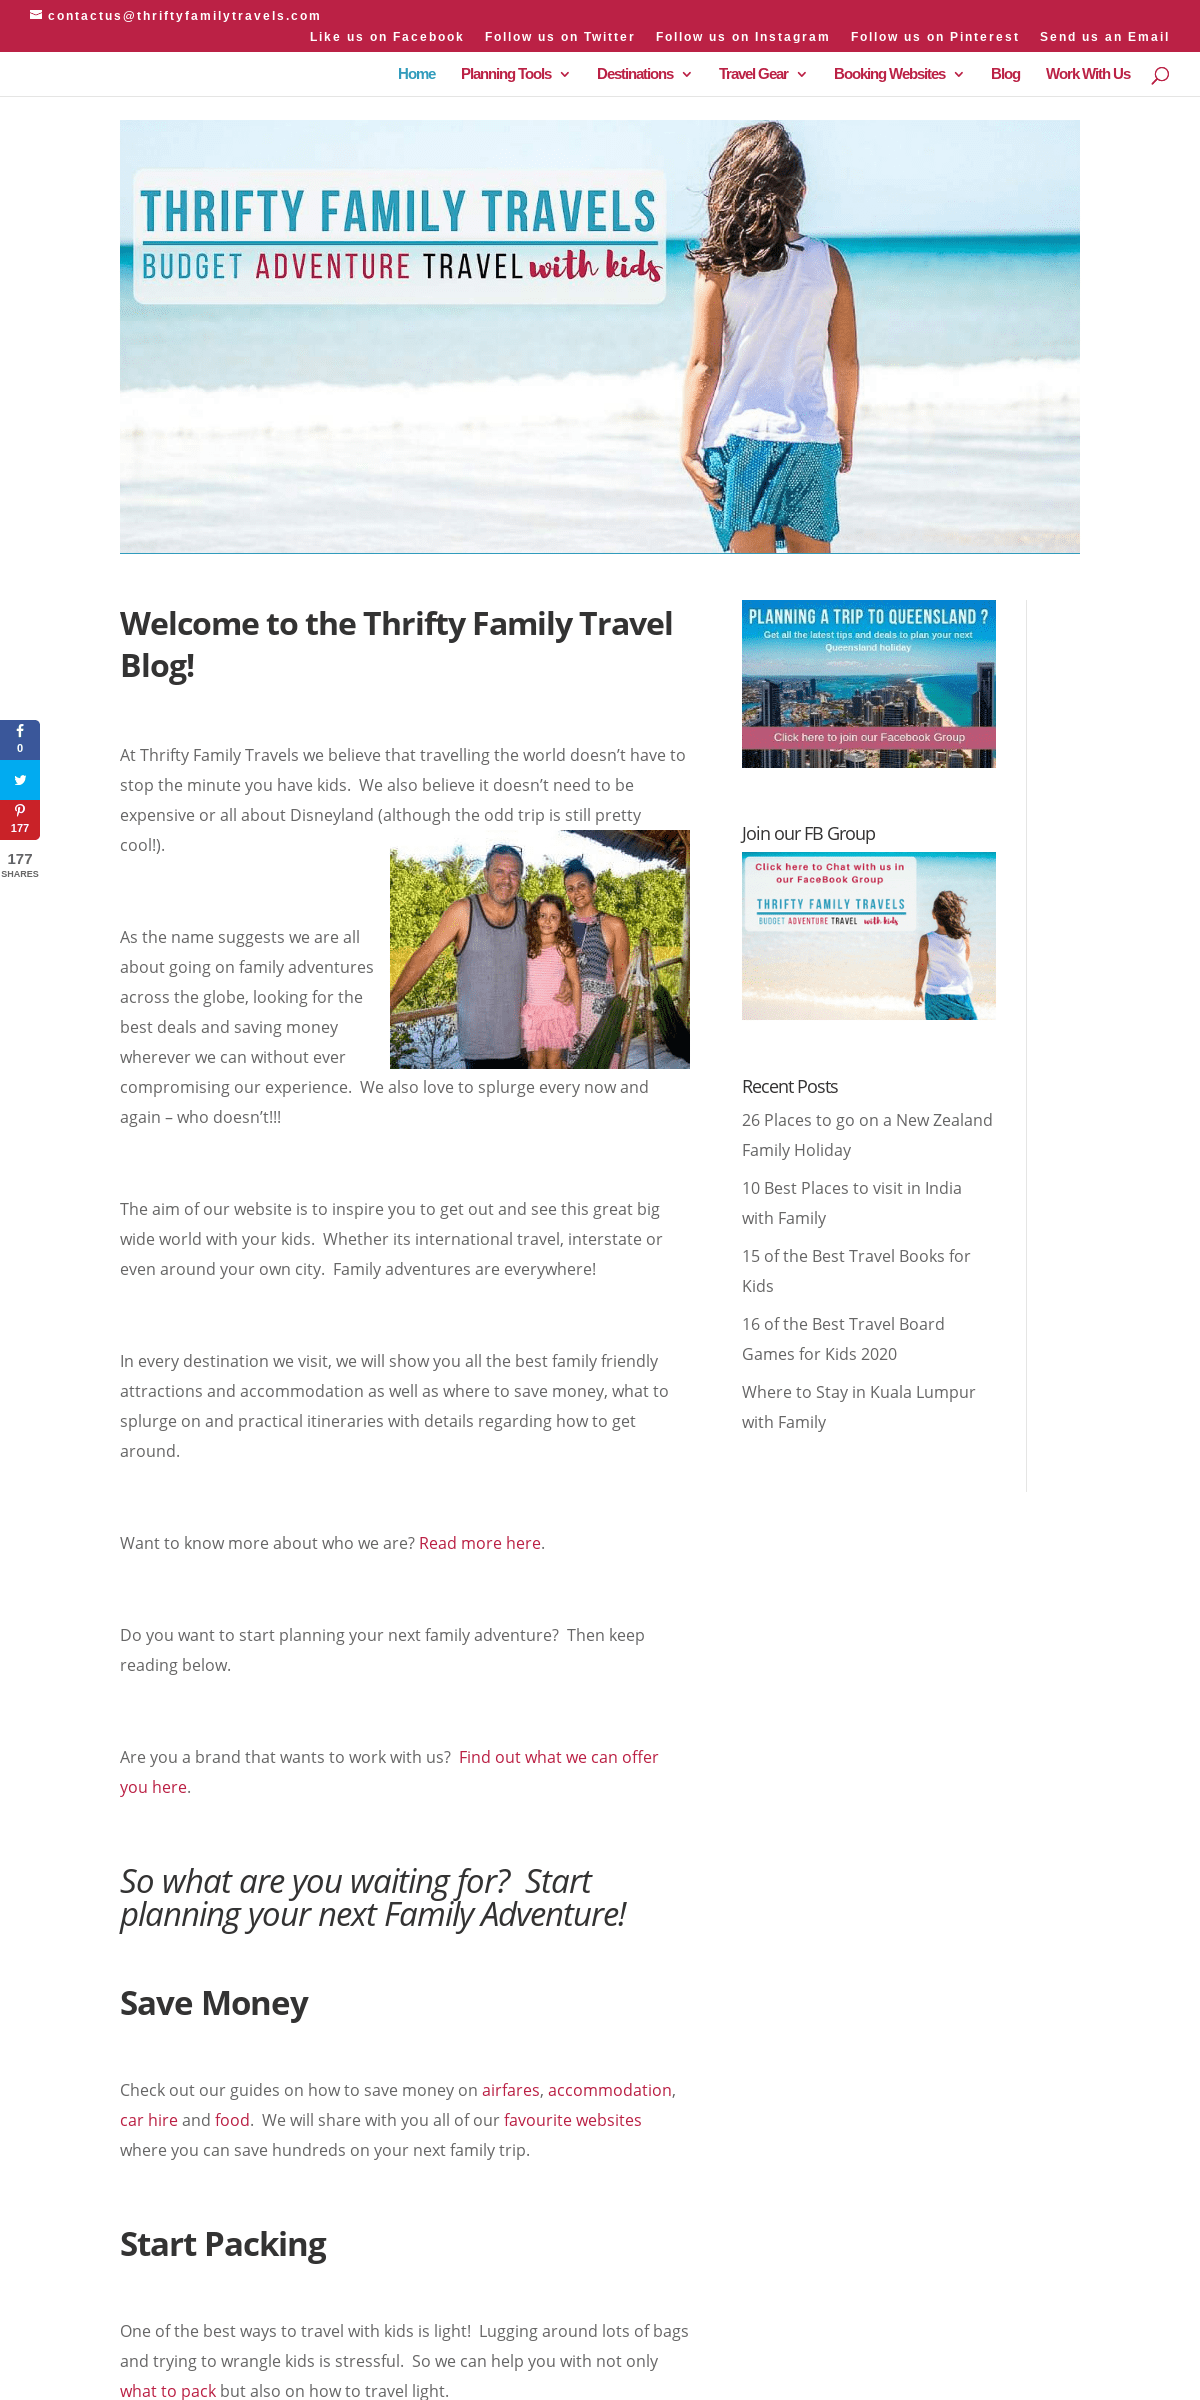 A complete backup of thriftyfamilytravels.com